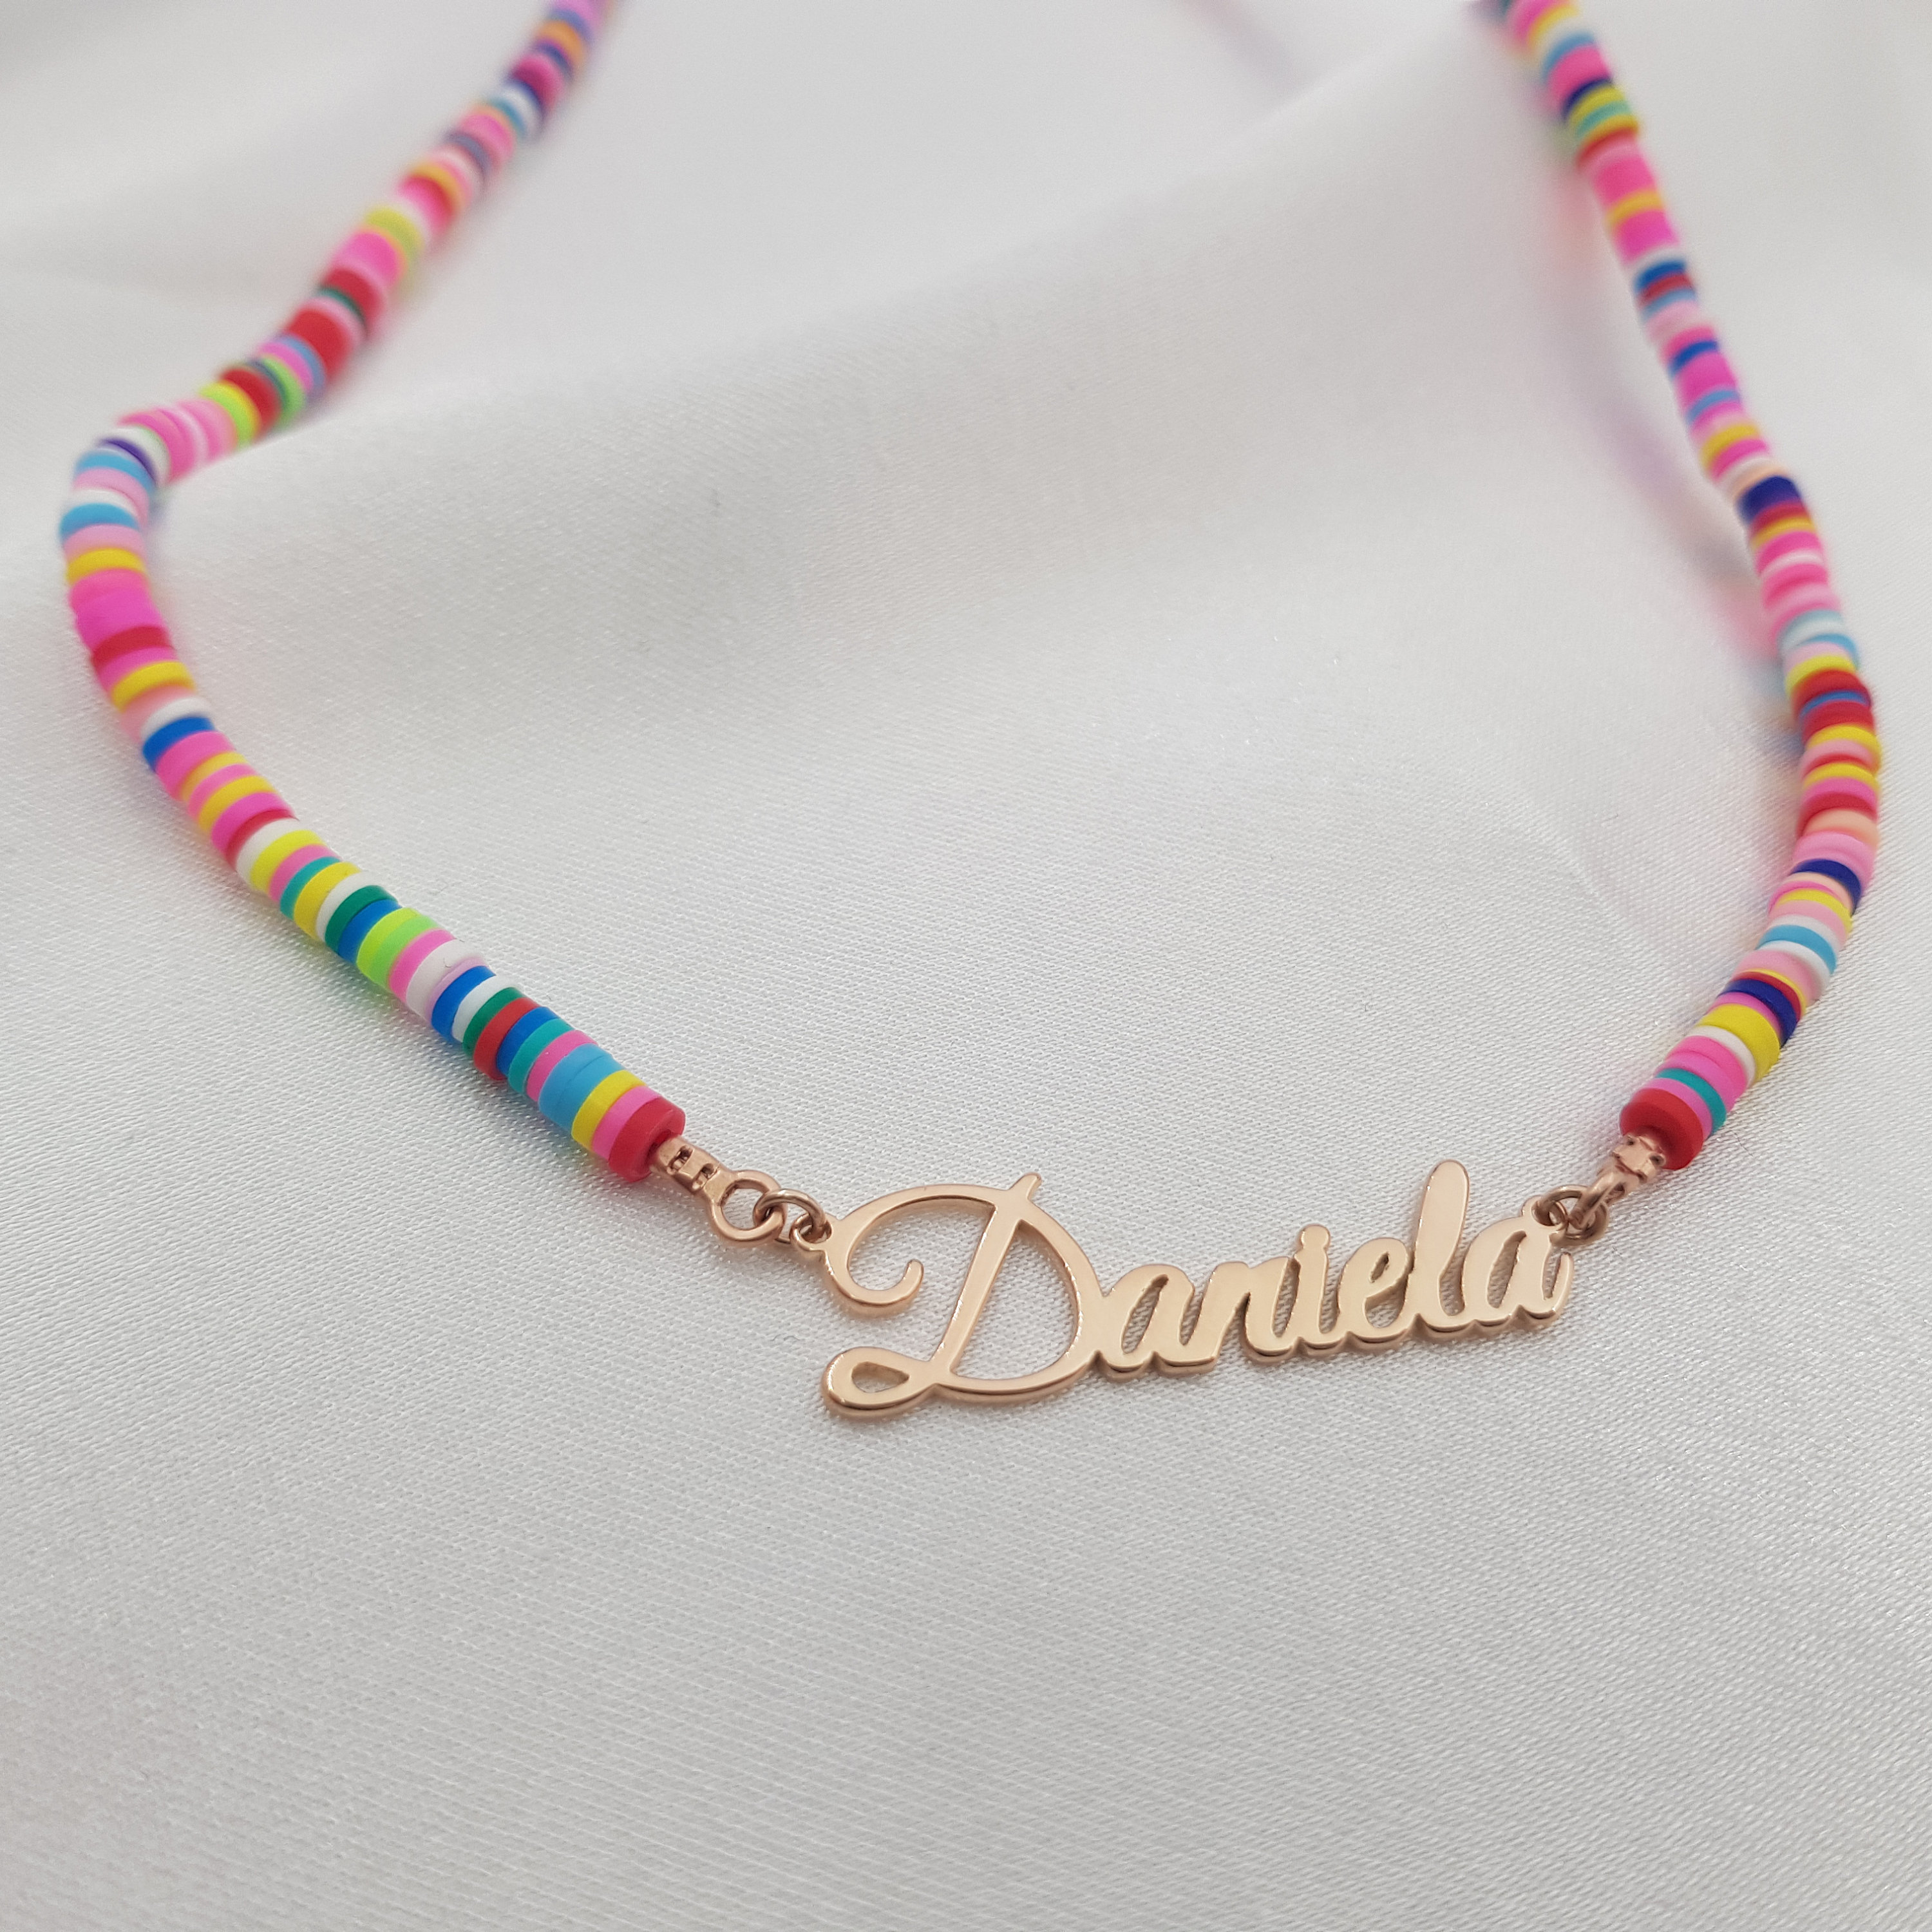 Kids Beaded Name Necklace, Kids Jewelry, Kids Birthday Gift, Party Favors,  Coolest Gifts for Girls, Top Gift Ideas, Little Girls Jewelry 